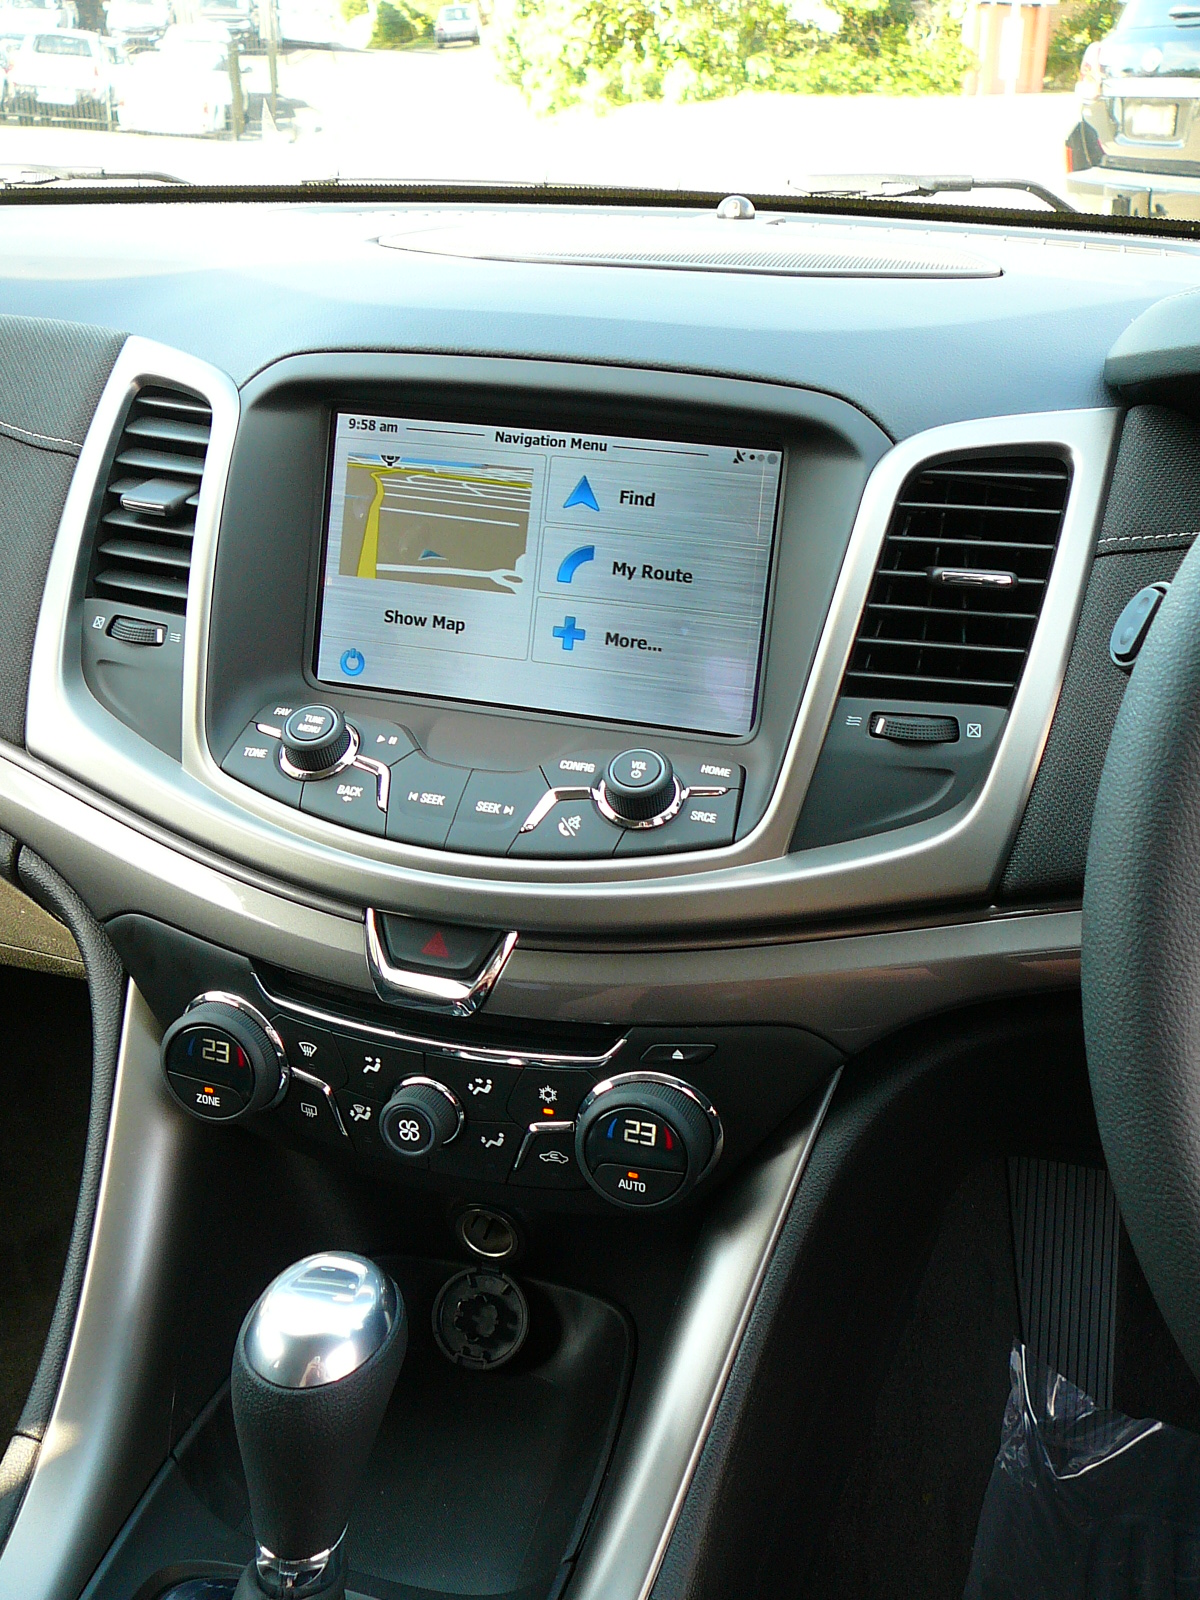 Holden Commodore VF 2014, Aftermarket GPS Navigation using the factory screen